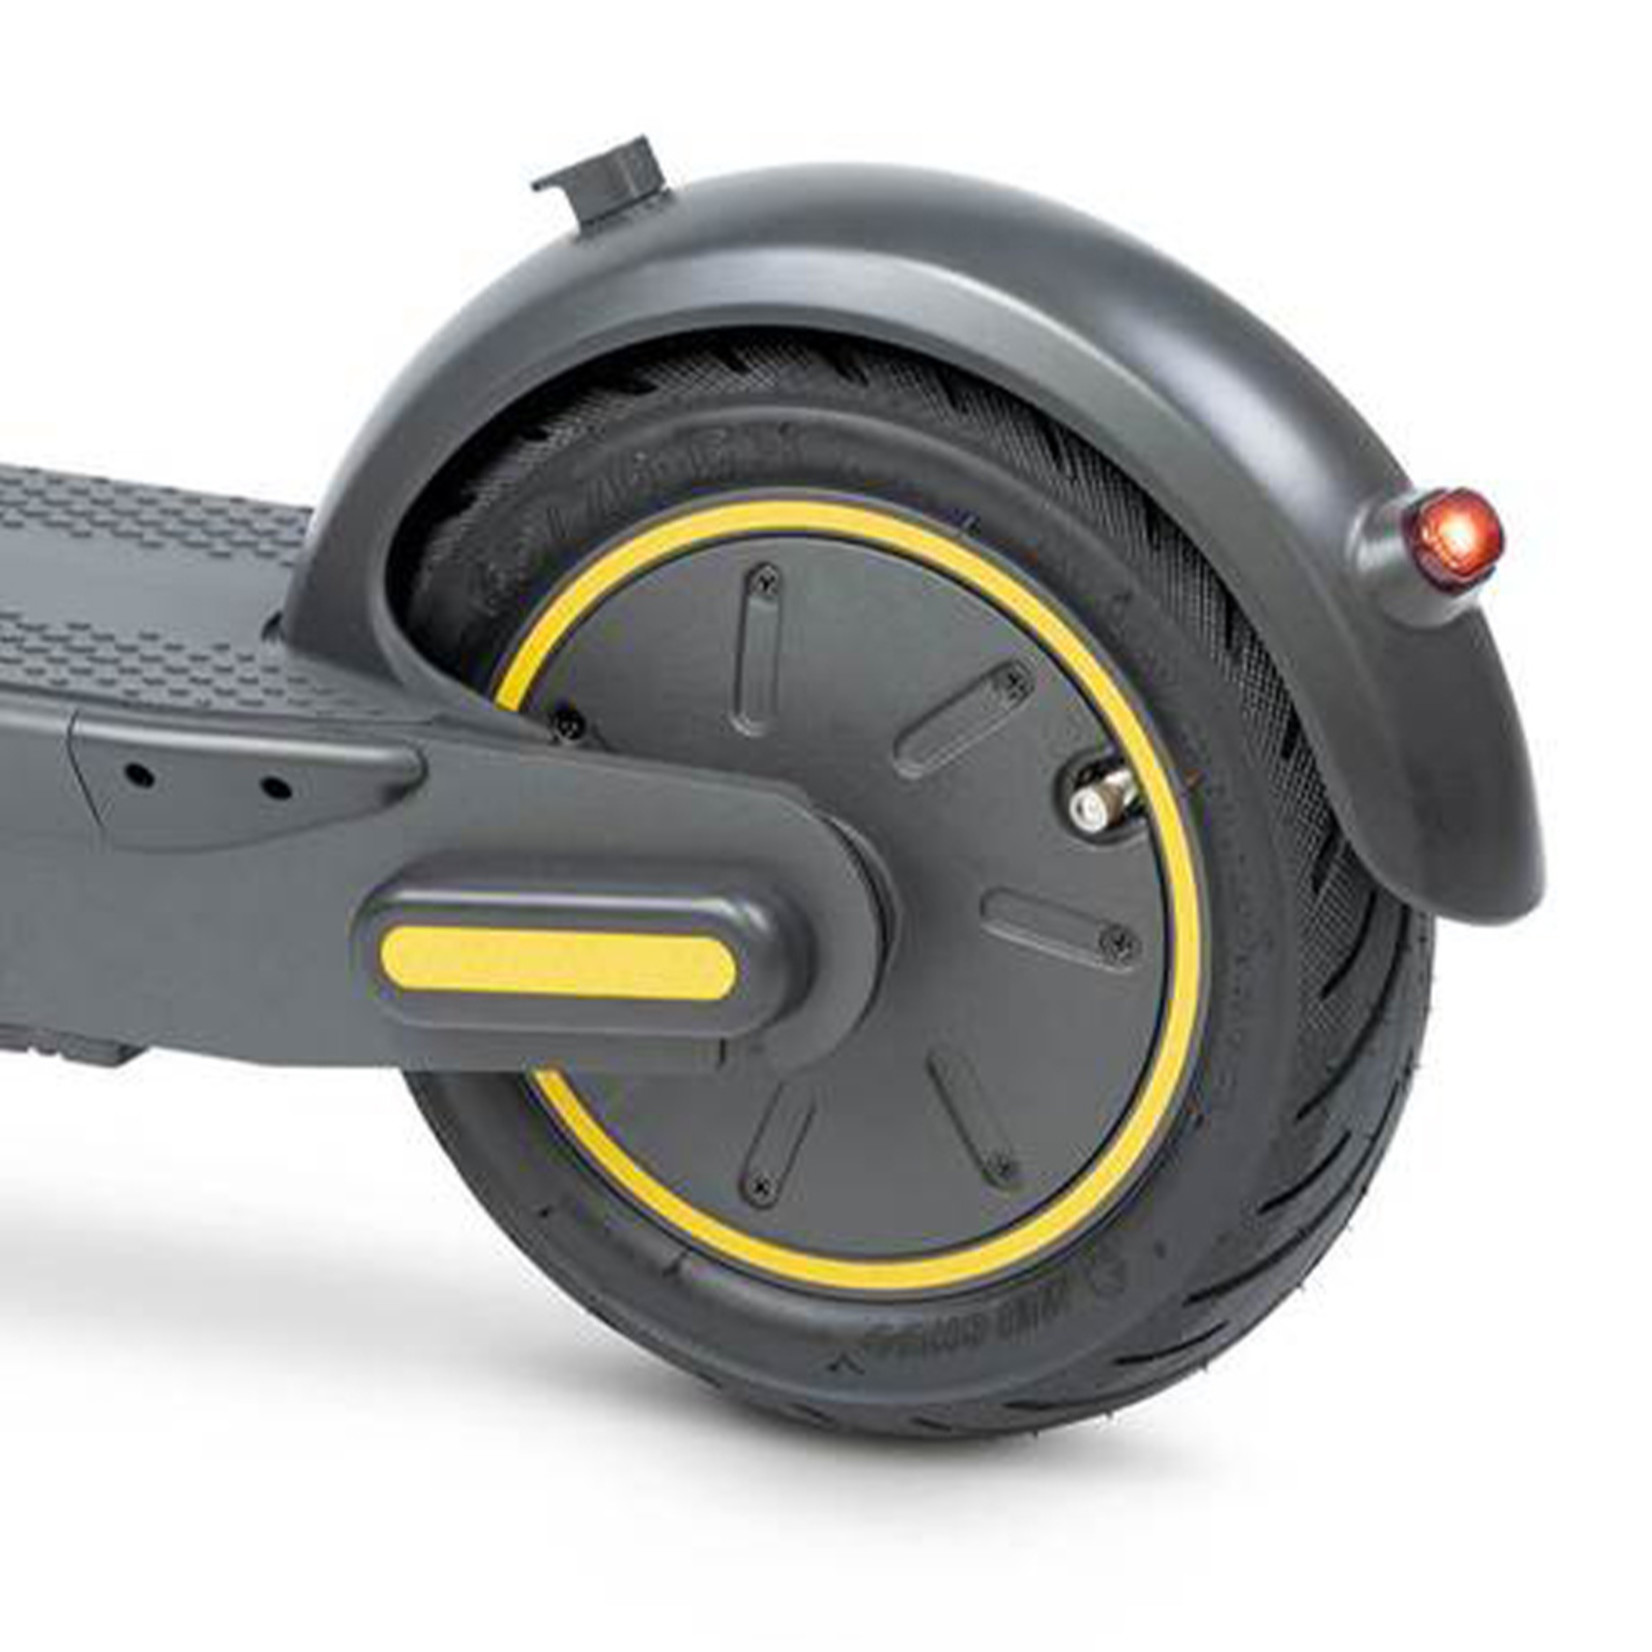 Electric Scooter Hunter Hl350 Max speed 30km folding